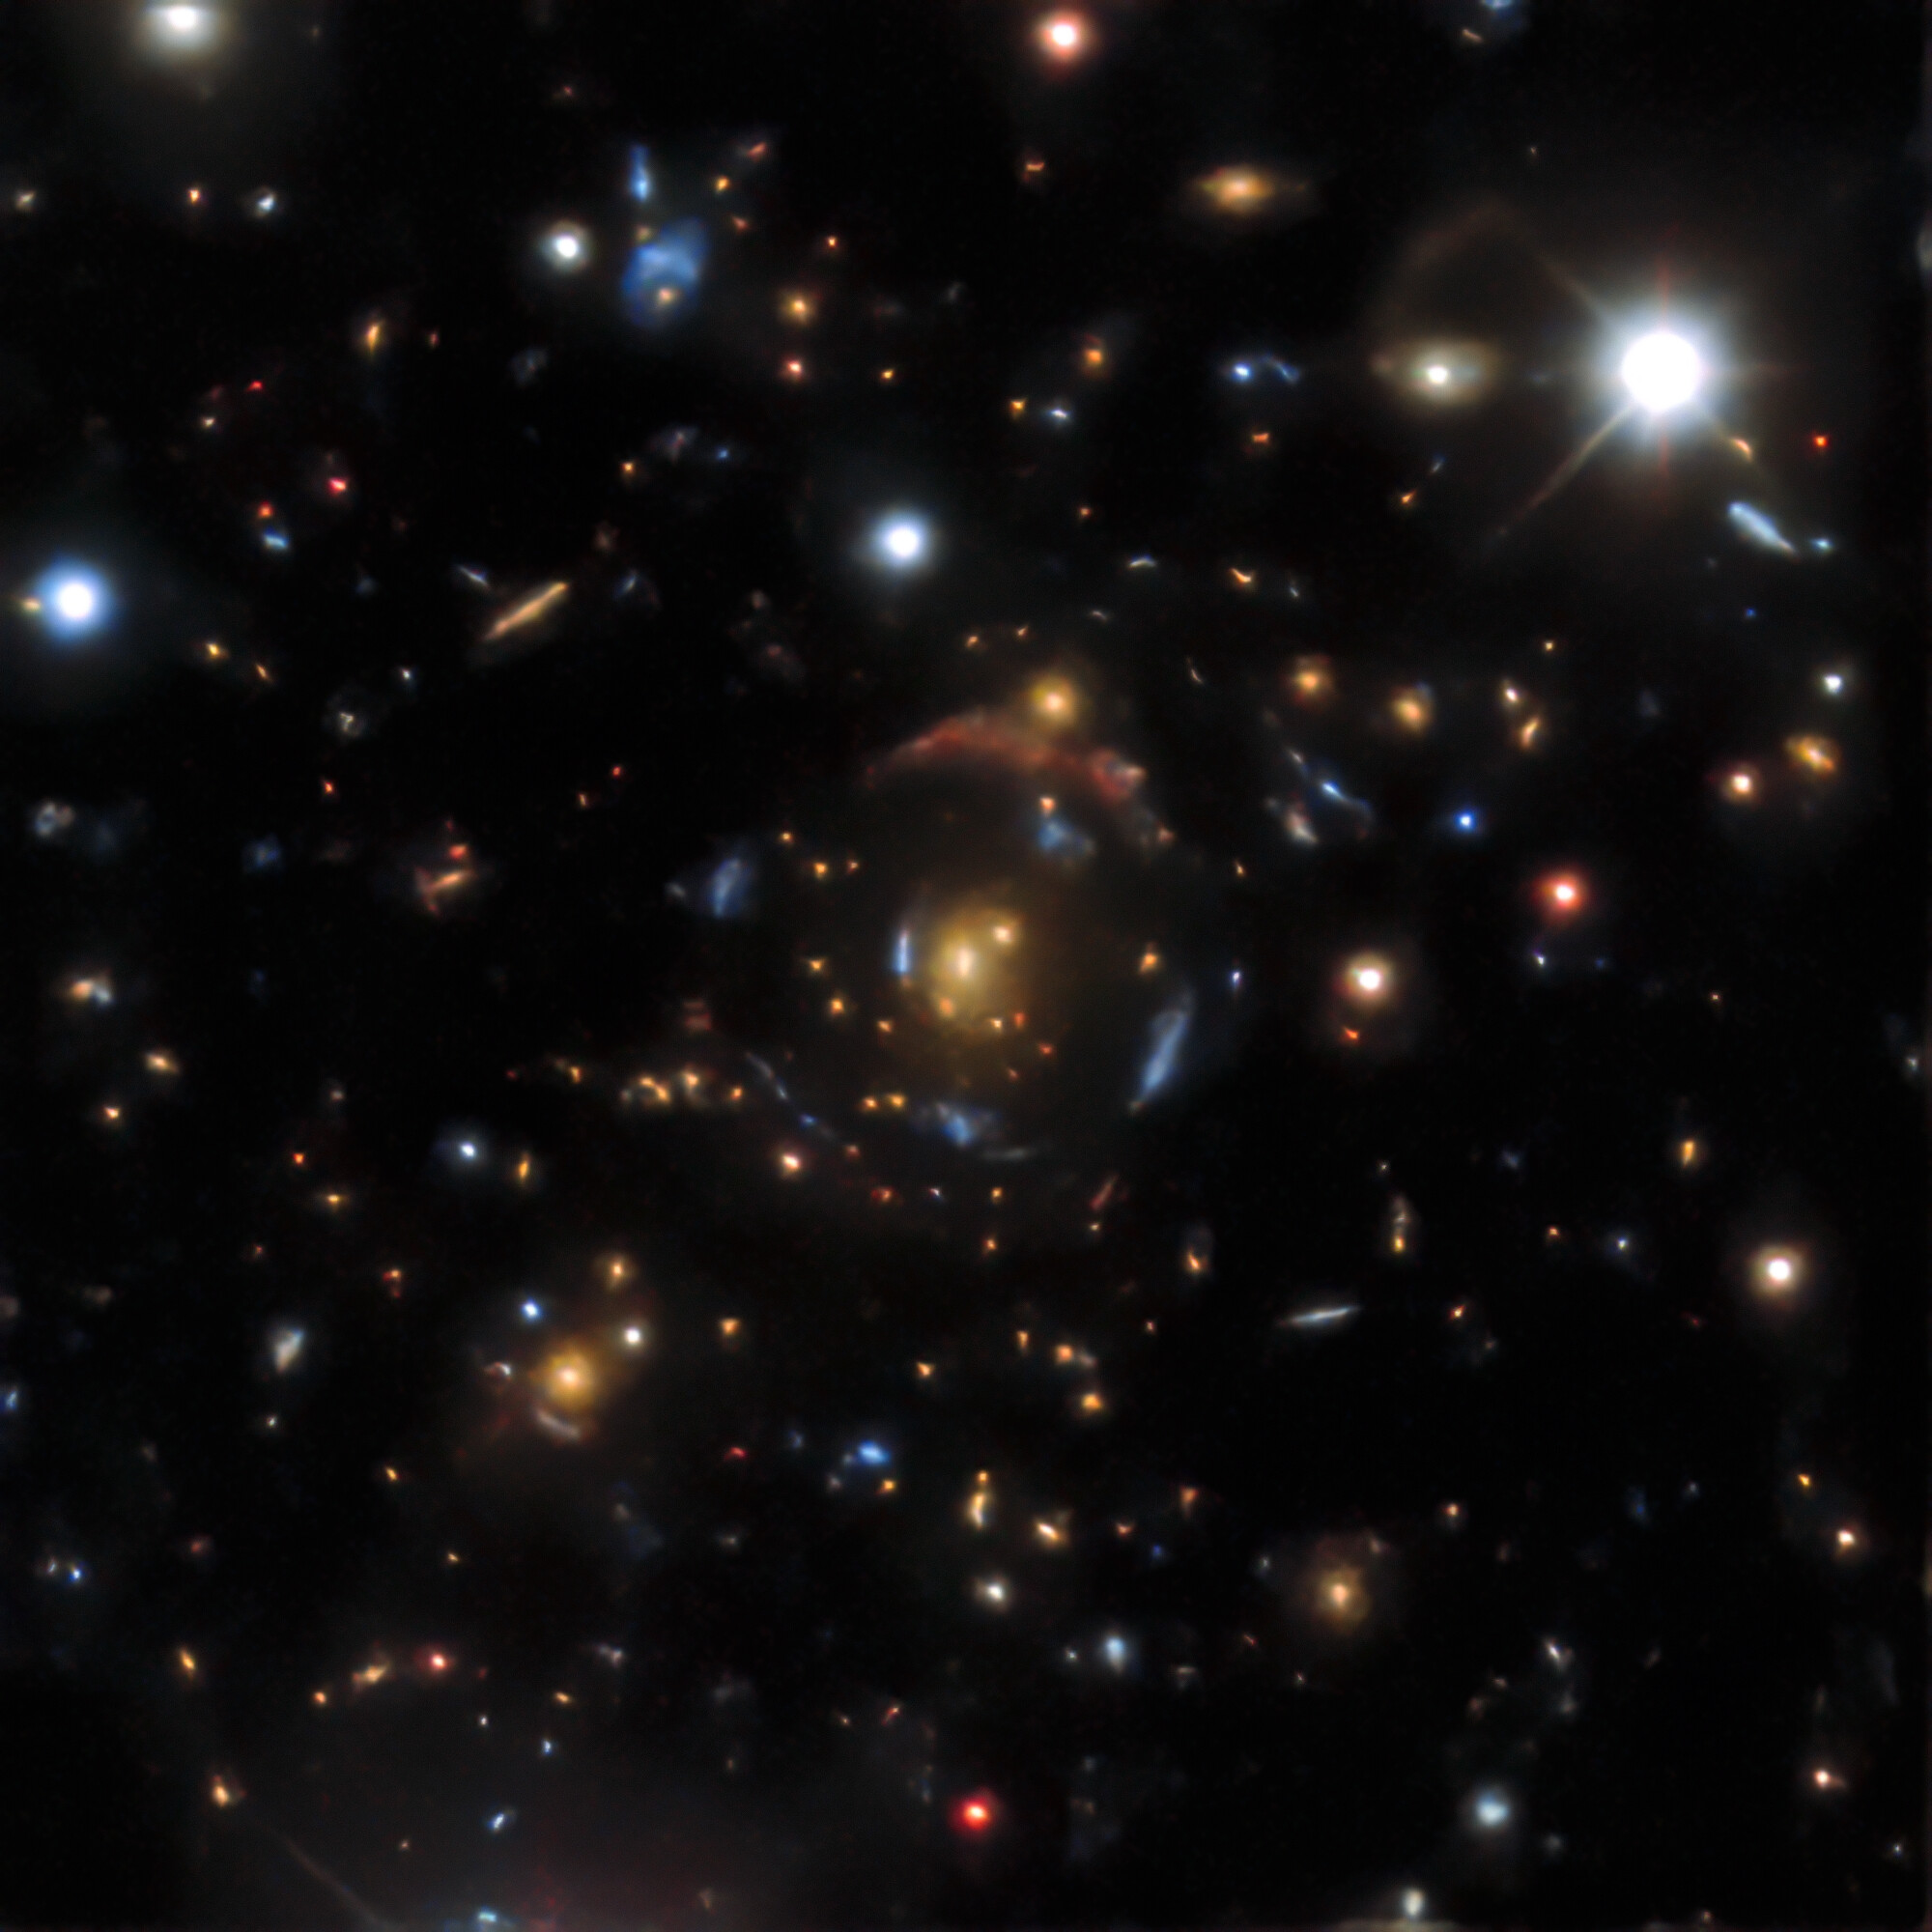 Newswise: Doubling the Number of Known Gravitational Lenses